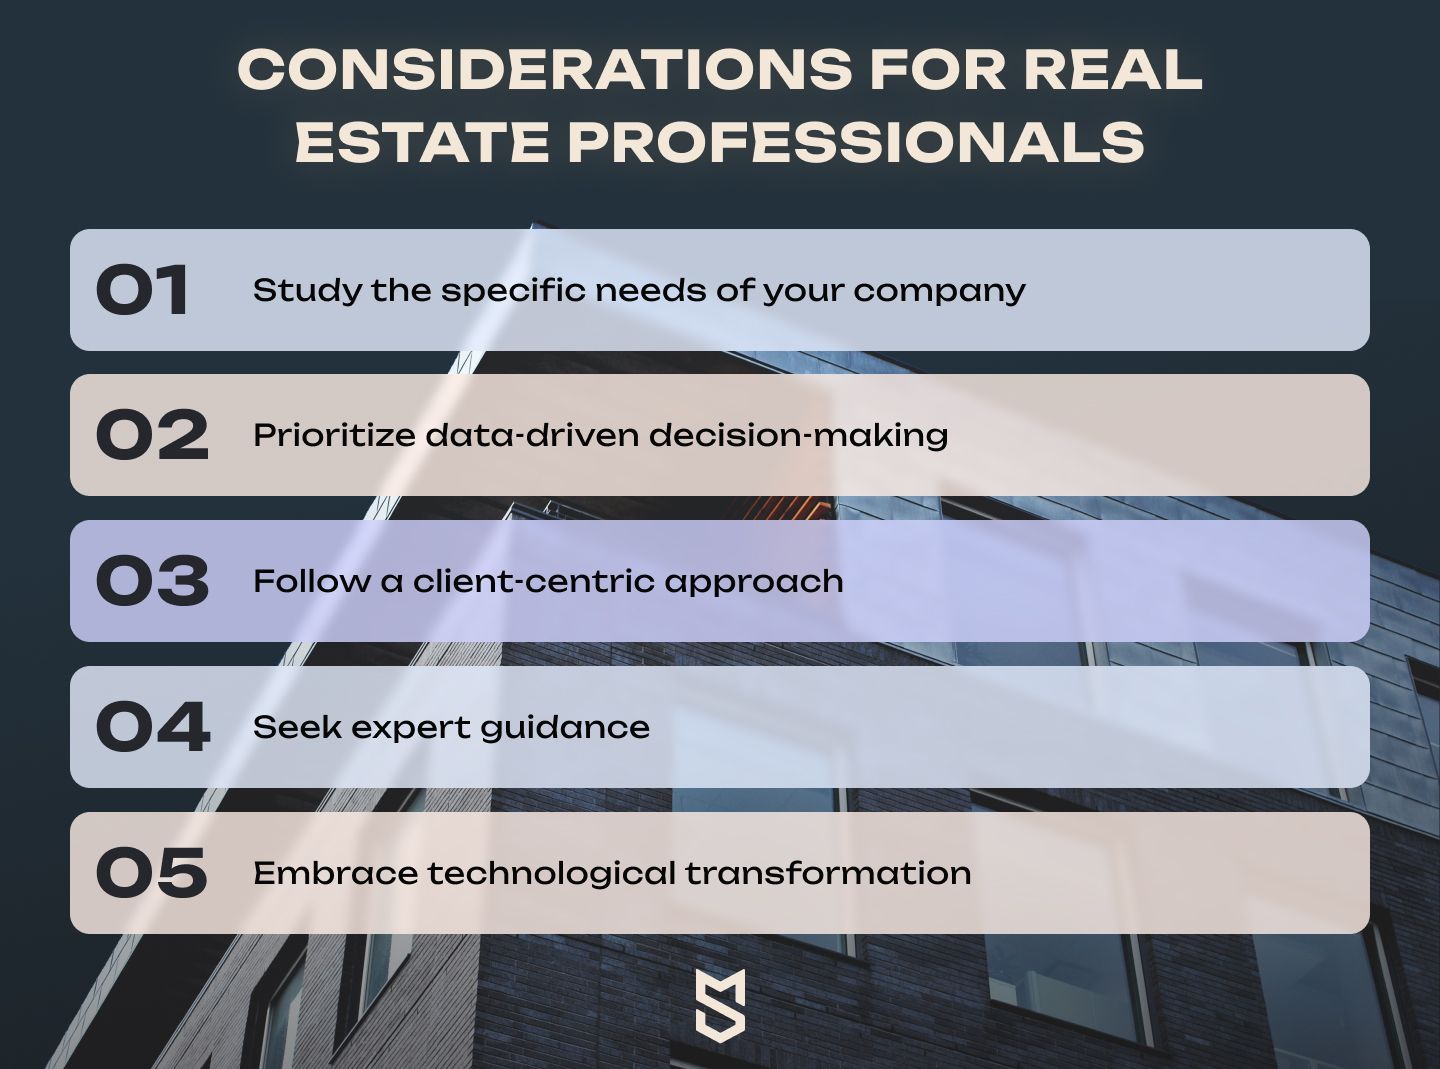 Considerations for real estate professionals